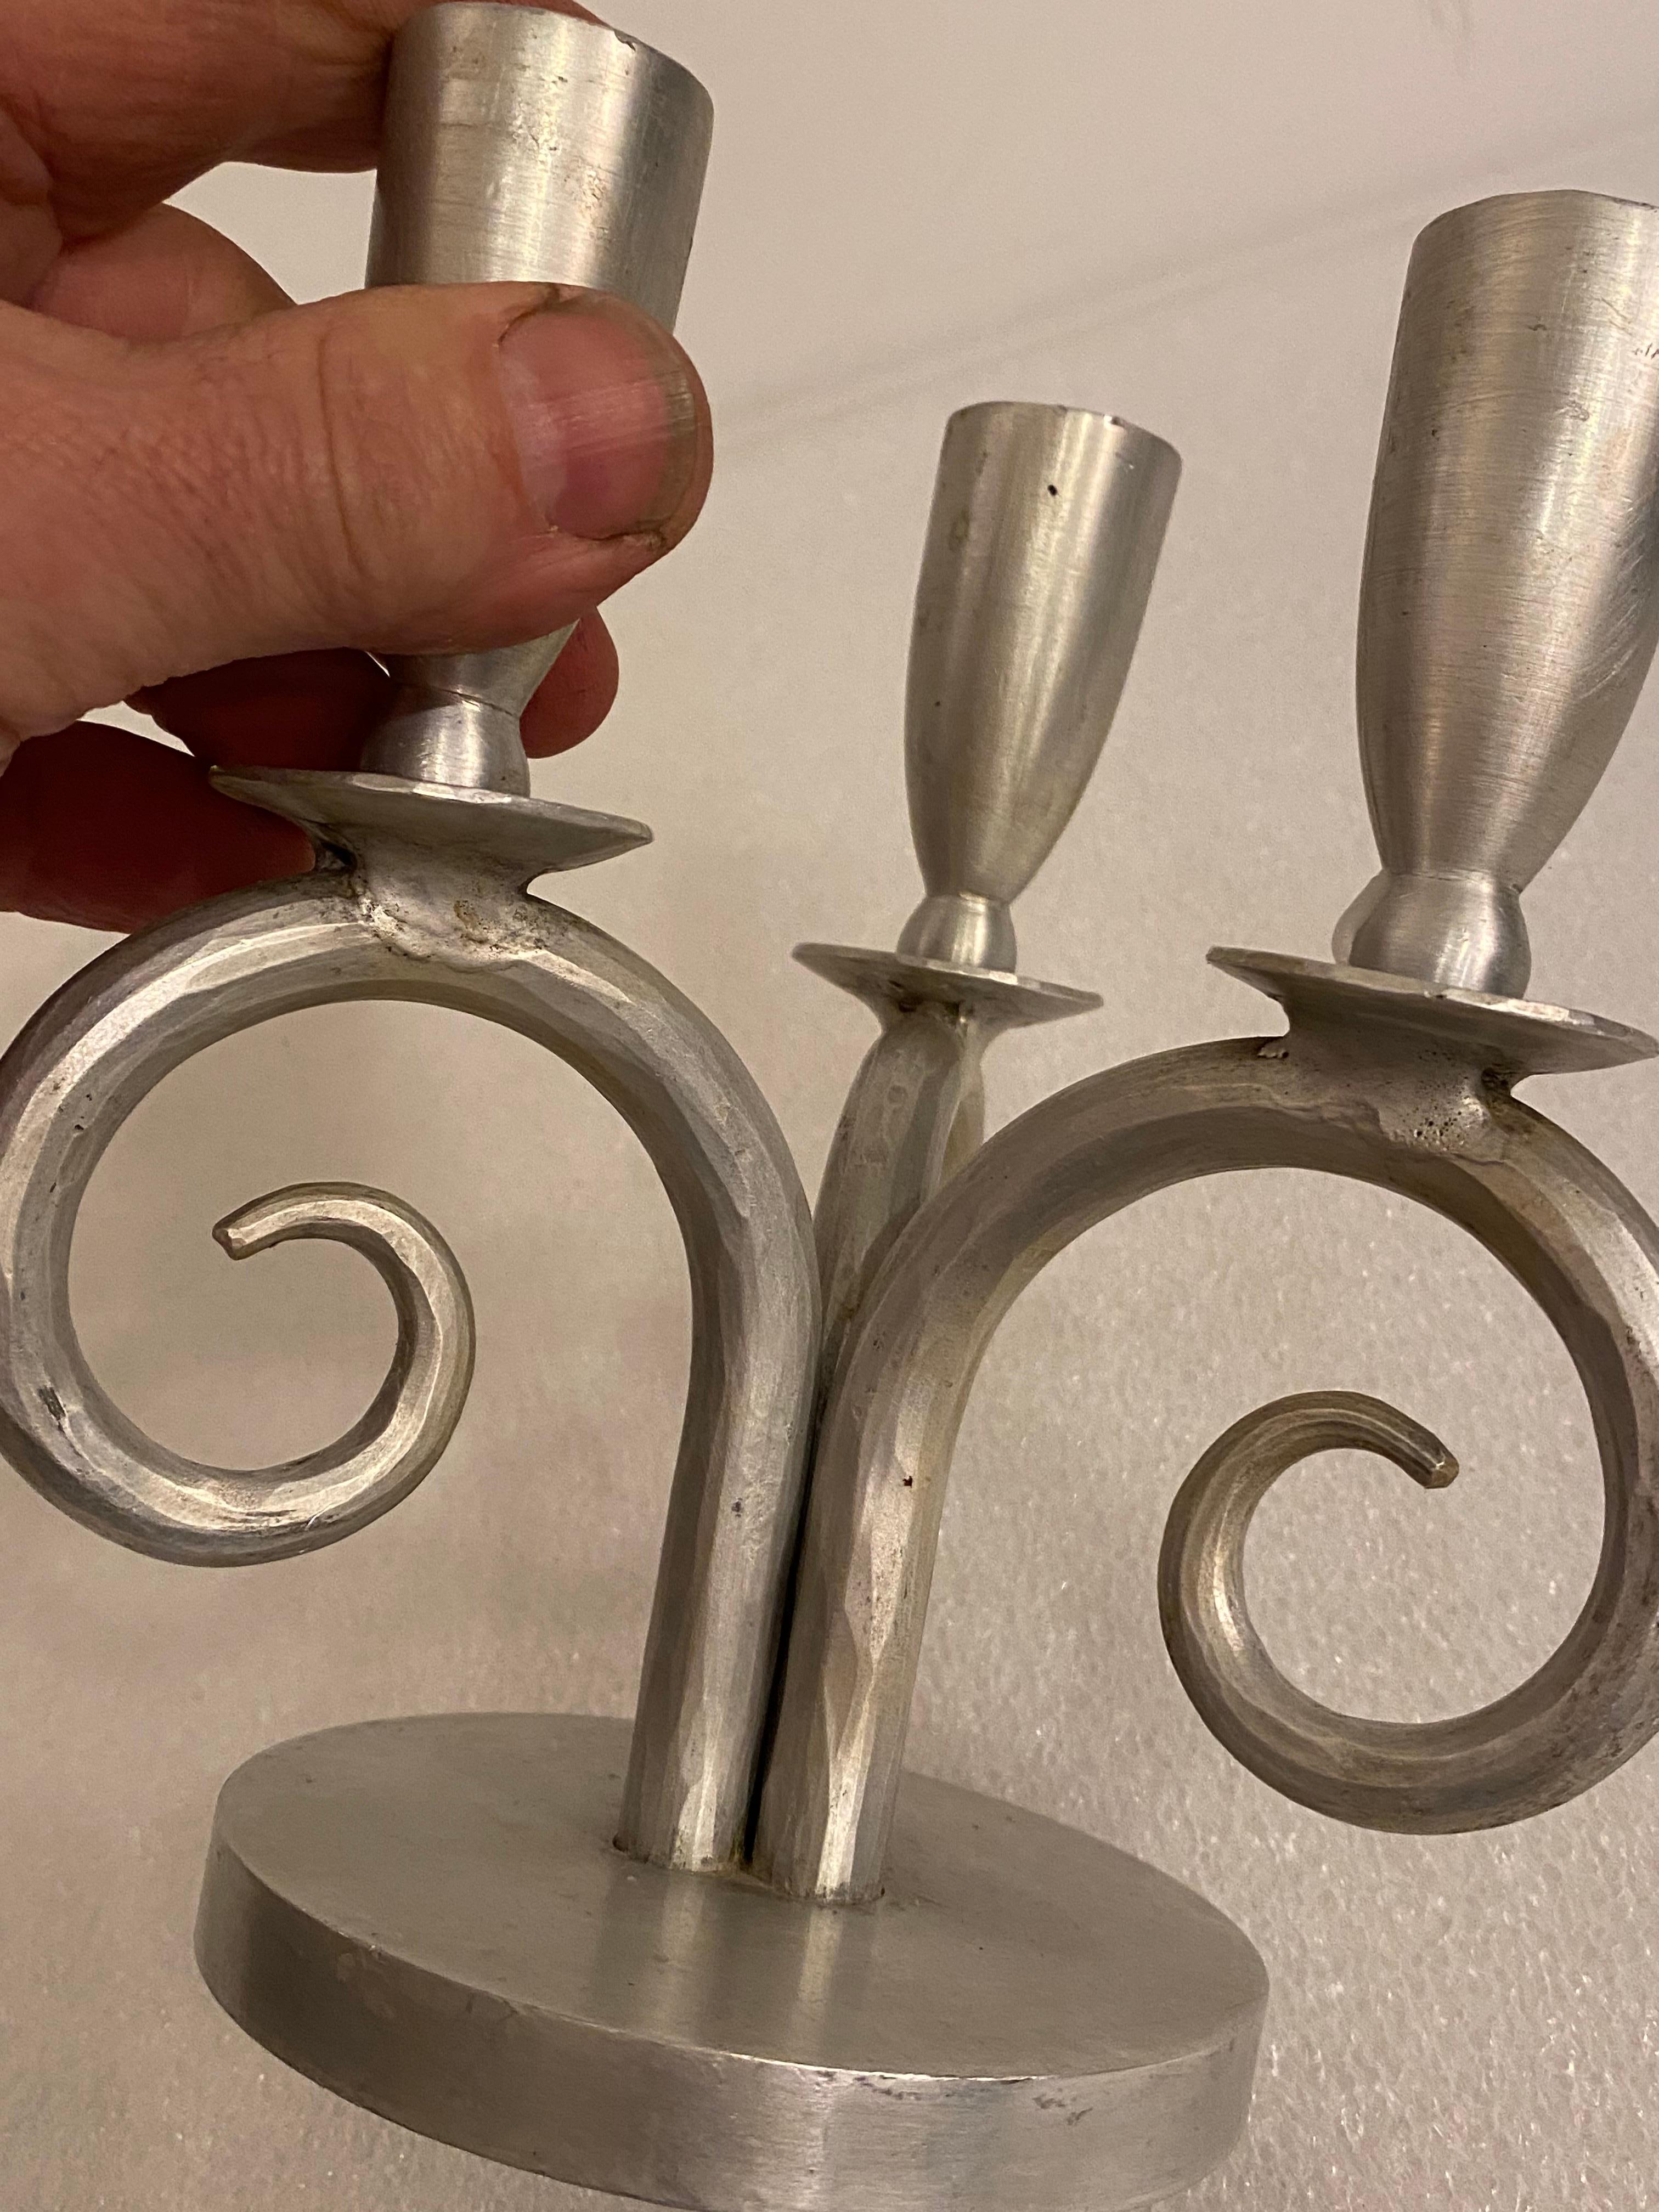 Palmer-Smith Aluminum Candlestick In Good Condition For Sale In Philadelphia, PA